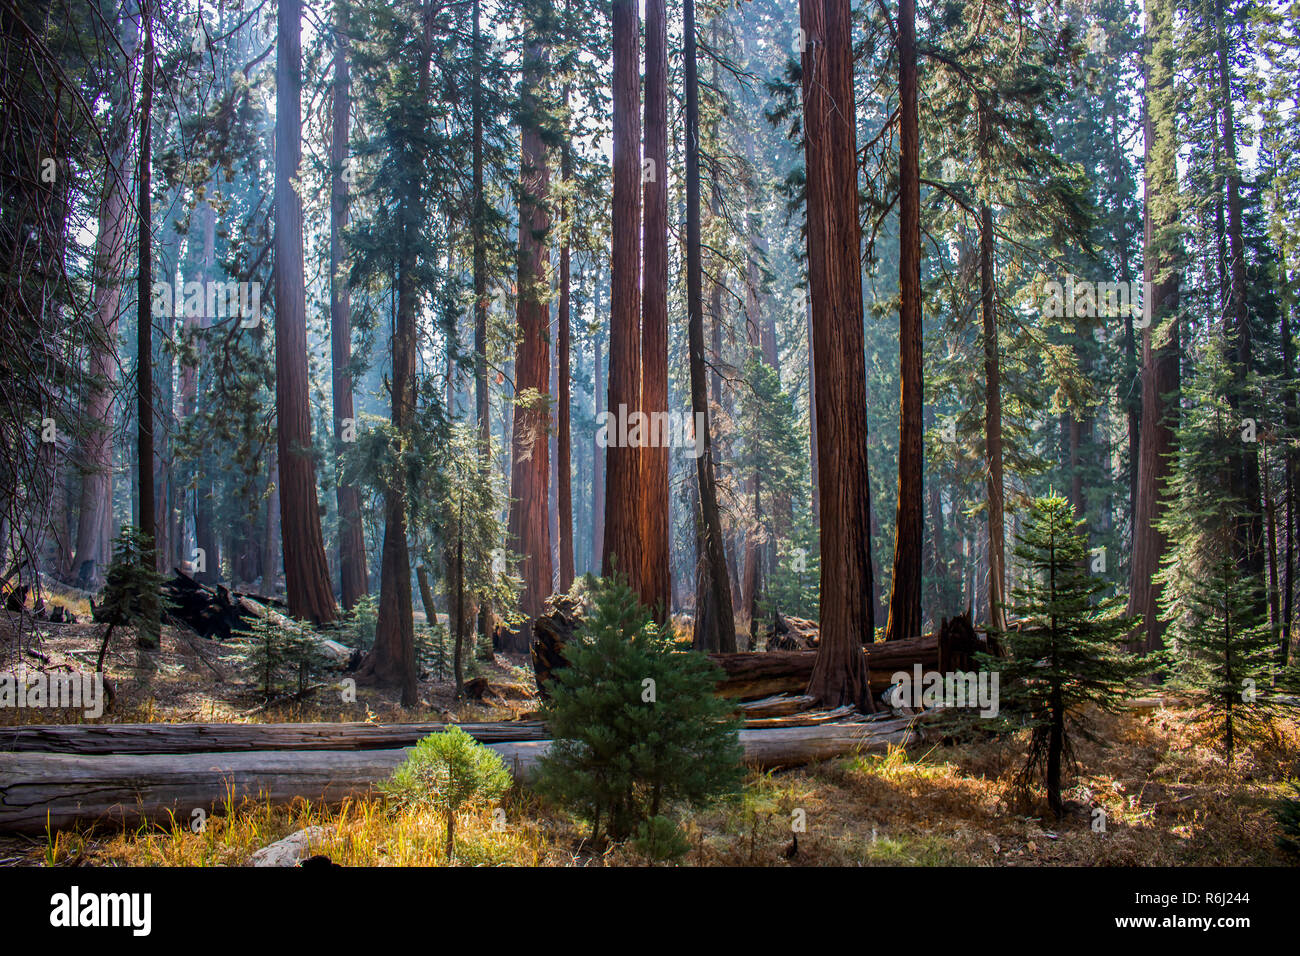 Forest and meadow of Giant Sequoia Redwood trees in fall sunlight in California's Sierra Nevada mountains. Stock Photo